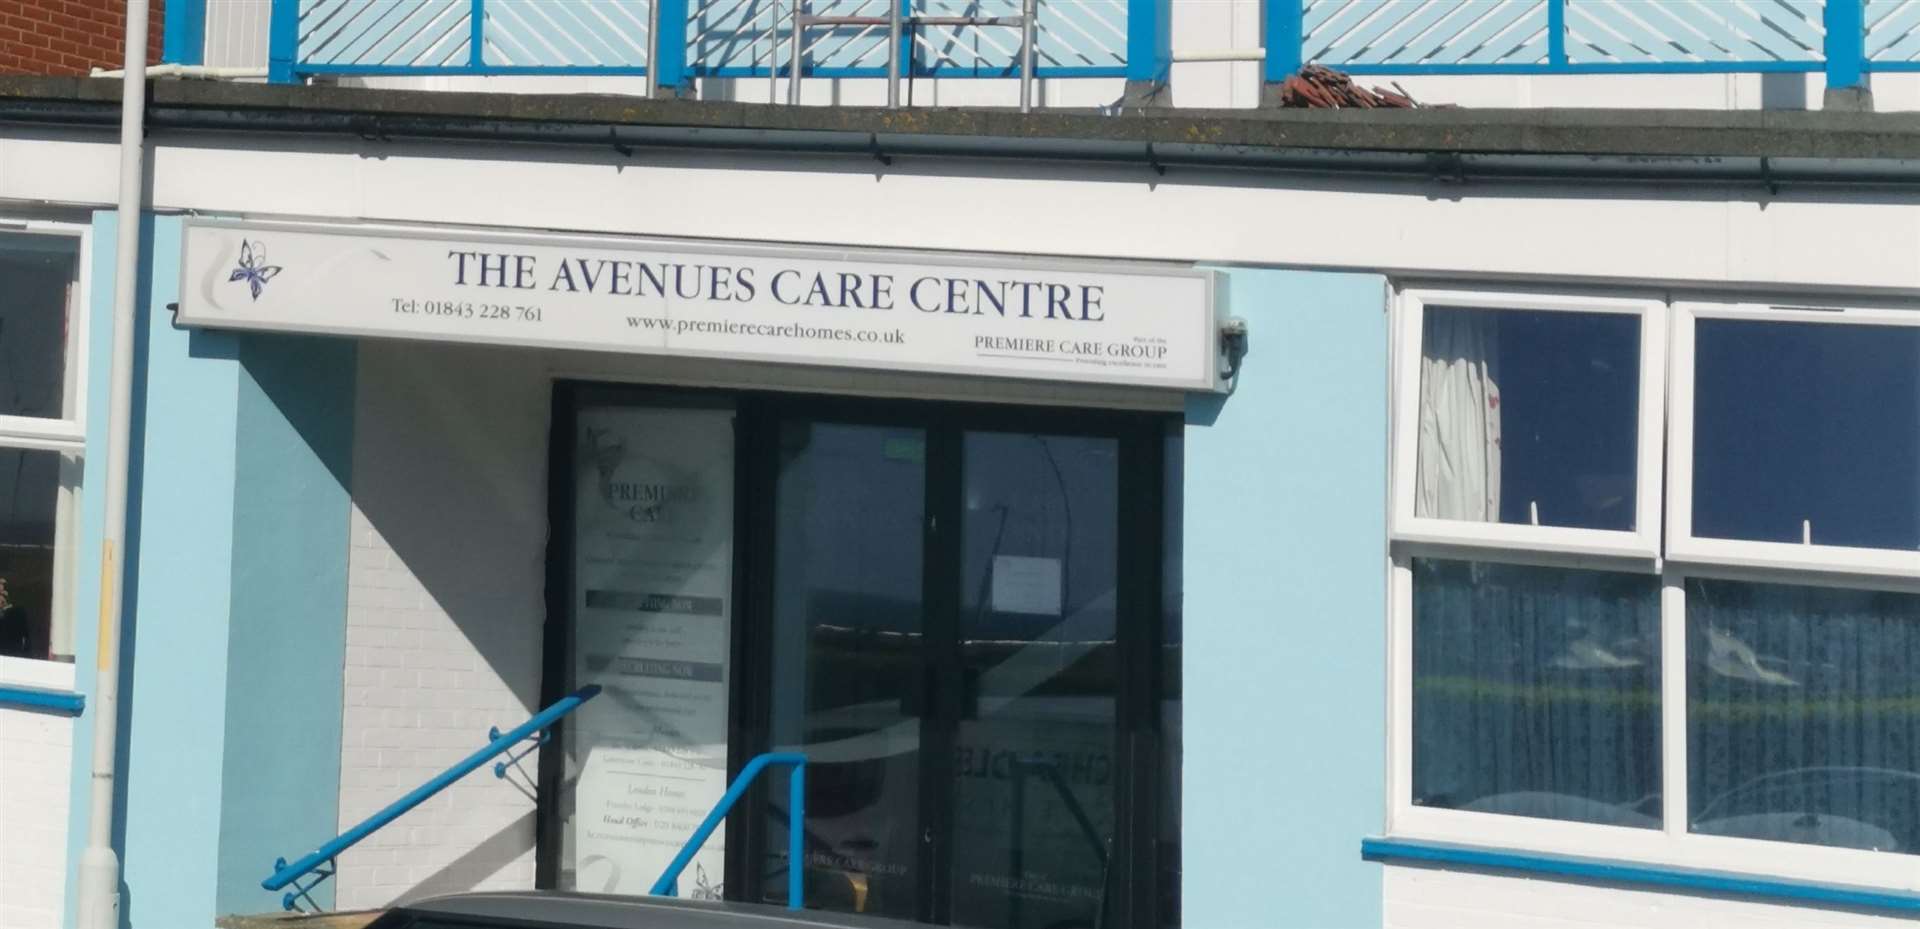 The Avenues Care Centre in Cliftonville